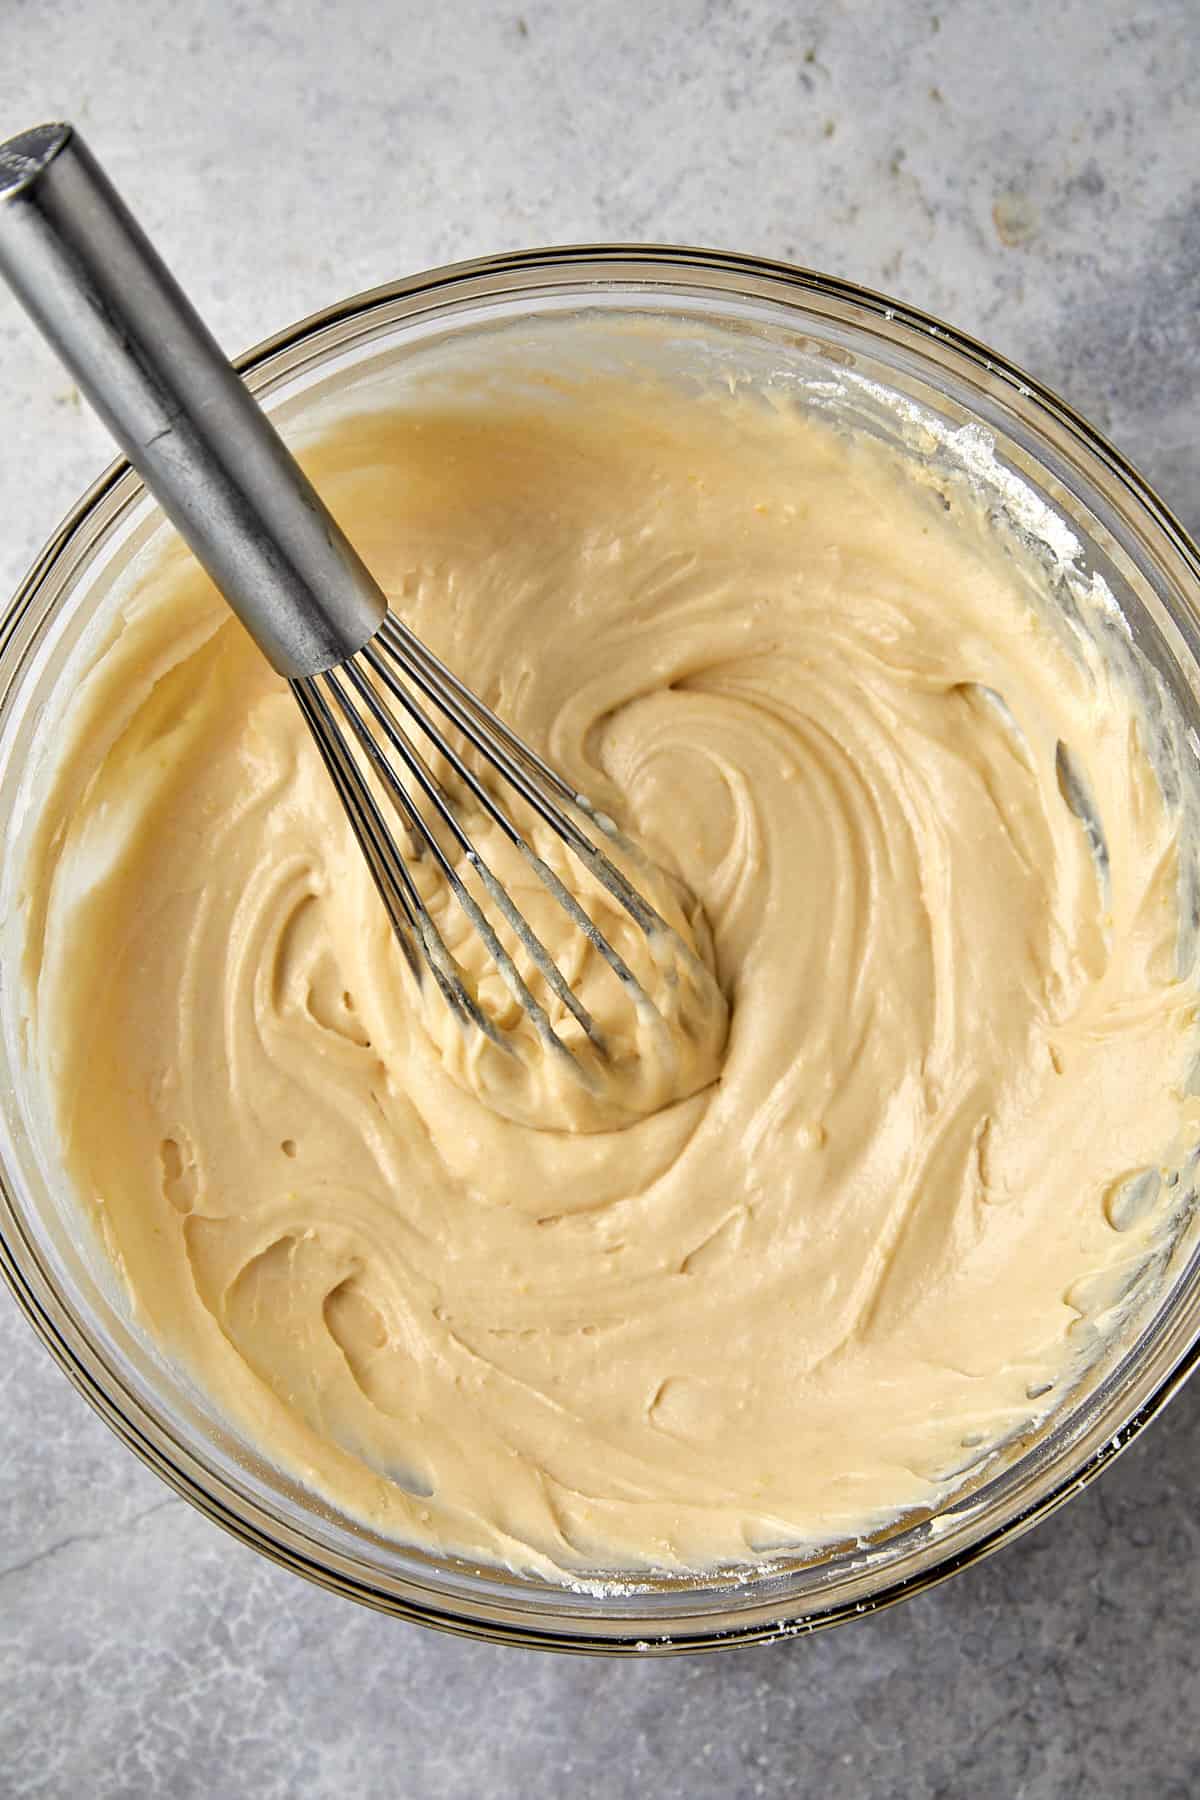 The image displays a glass mixing bowl containing a smooth, creamy batter. A metal whisk is partially immersed in the batter, indicating that the mixing process is either ongoing or just completed. The batter appears well-blended and is likely ready for the next step in a baking recipe, such as being poured into a baking pan to make a cake or loaf. The gray surface beneath the bowl suggests a kitchen countertop.